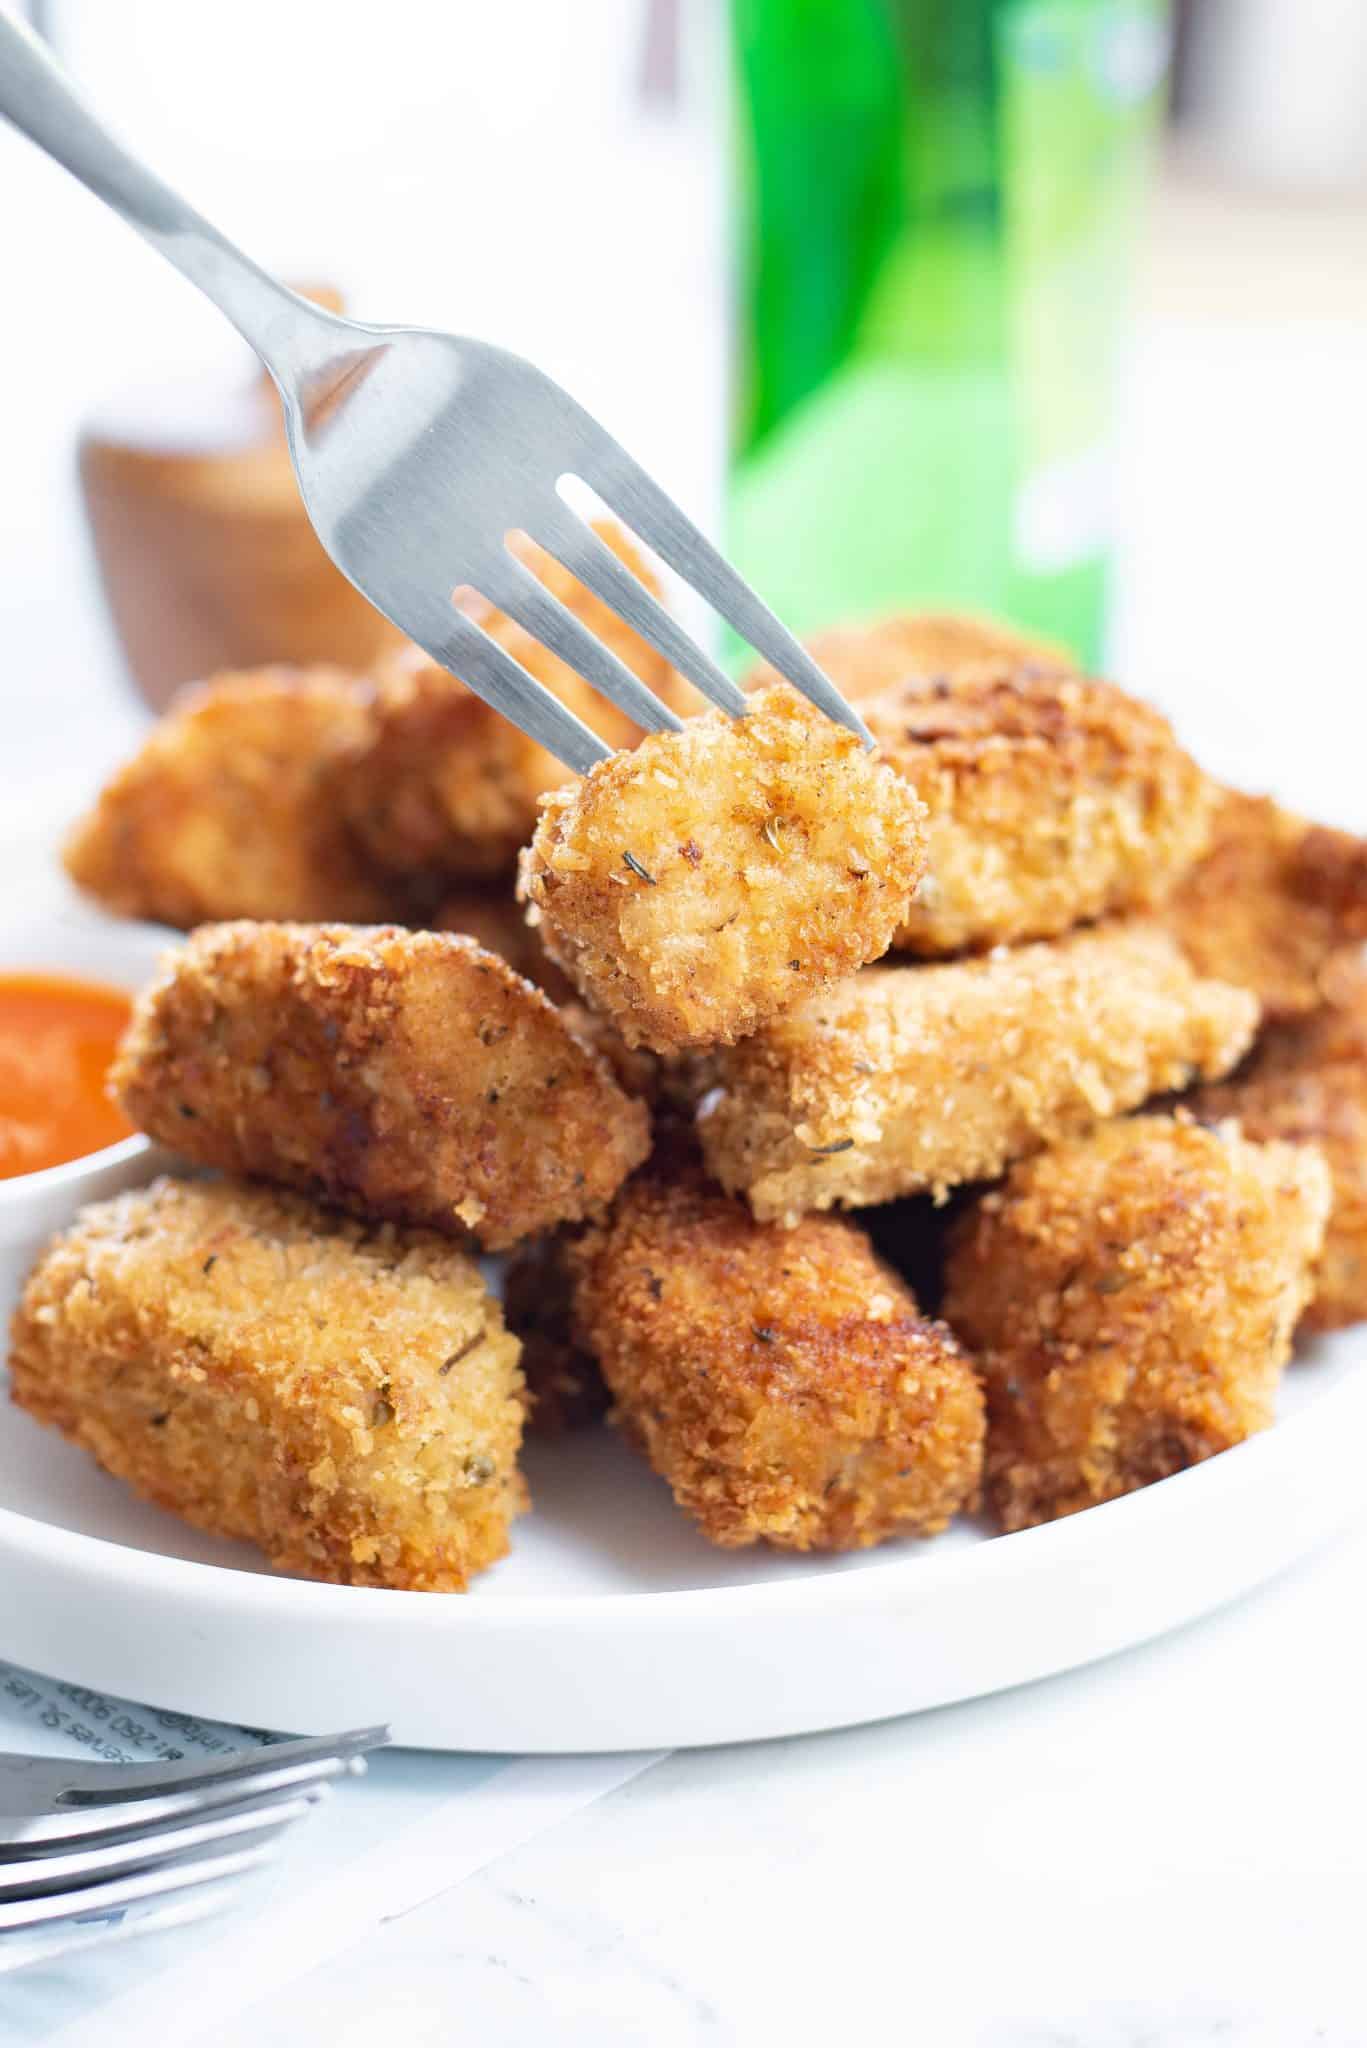 Plate of air fryer chicken nuggets.